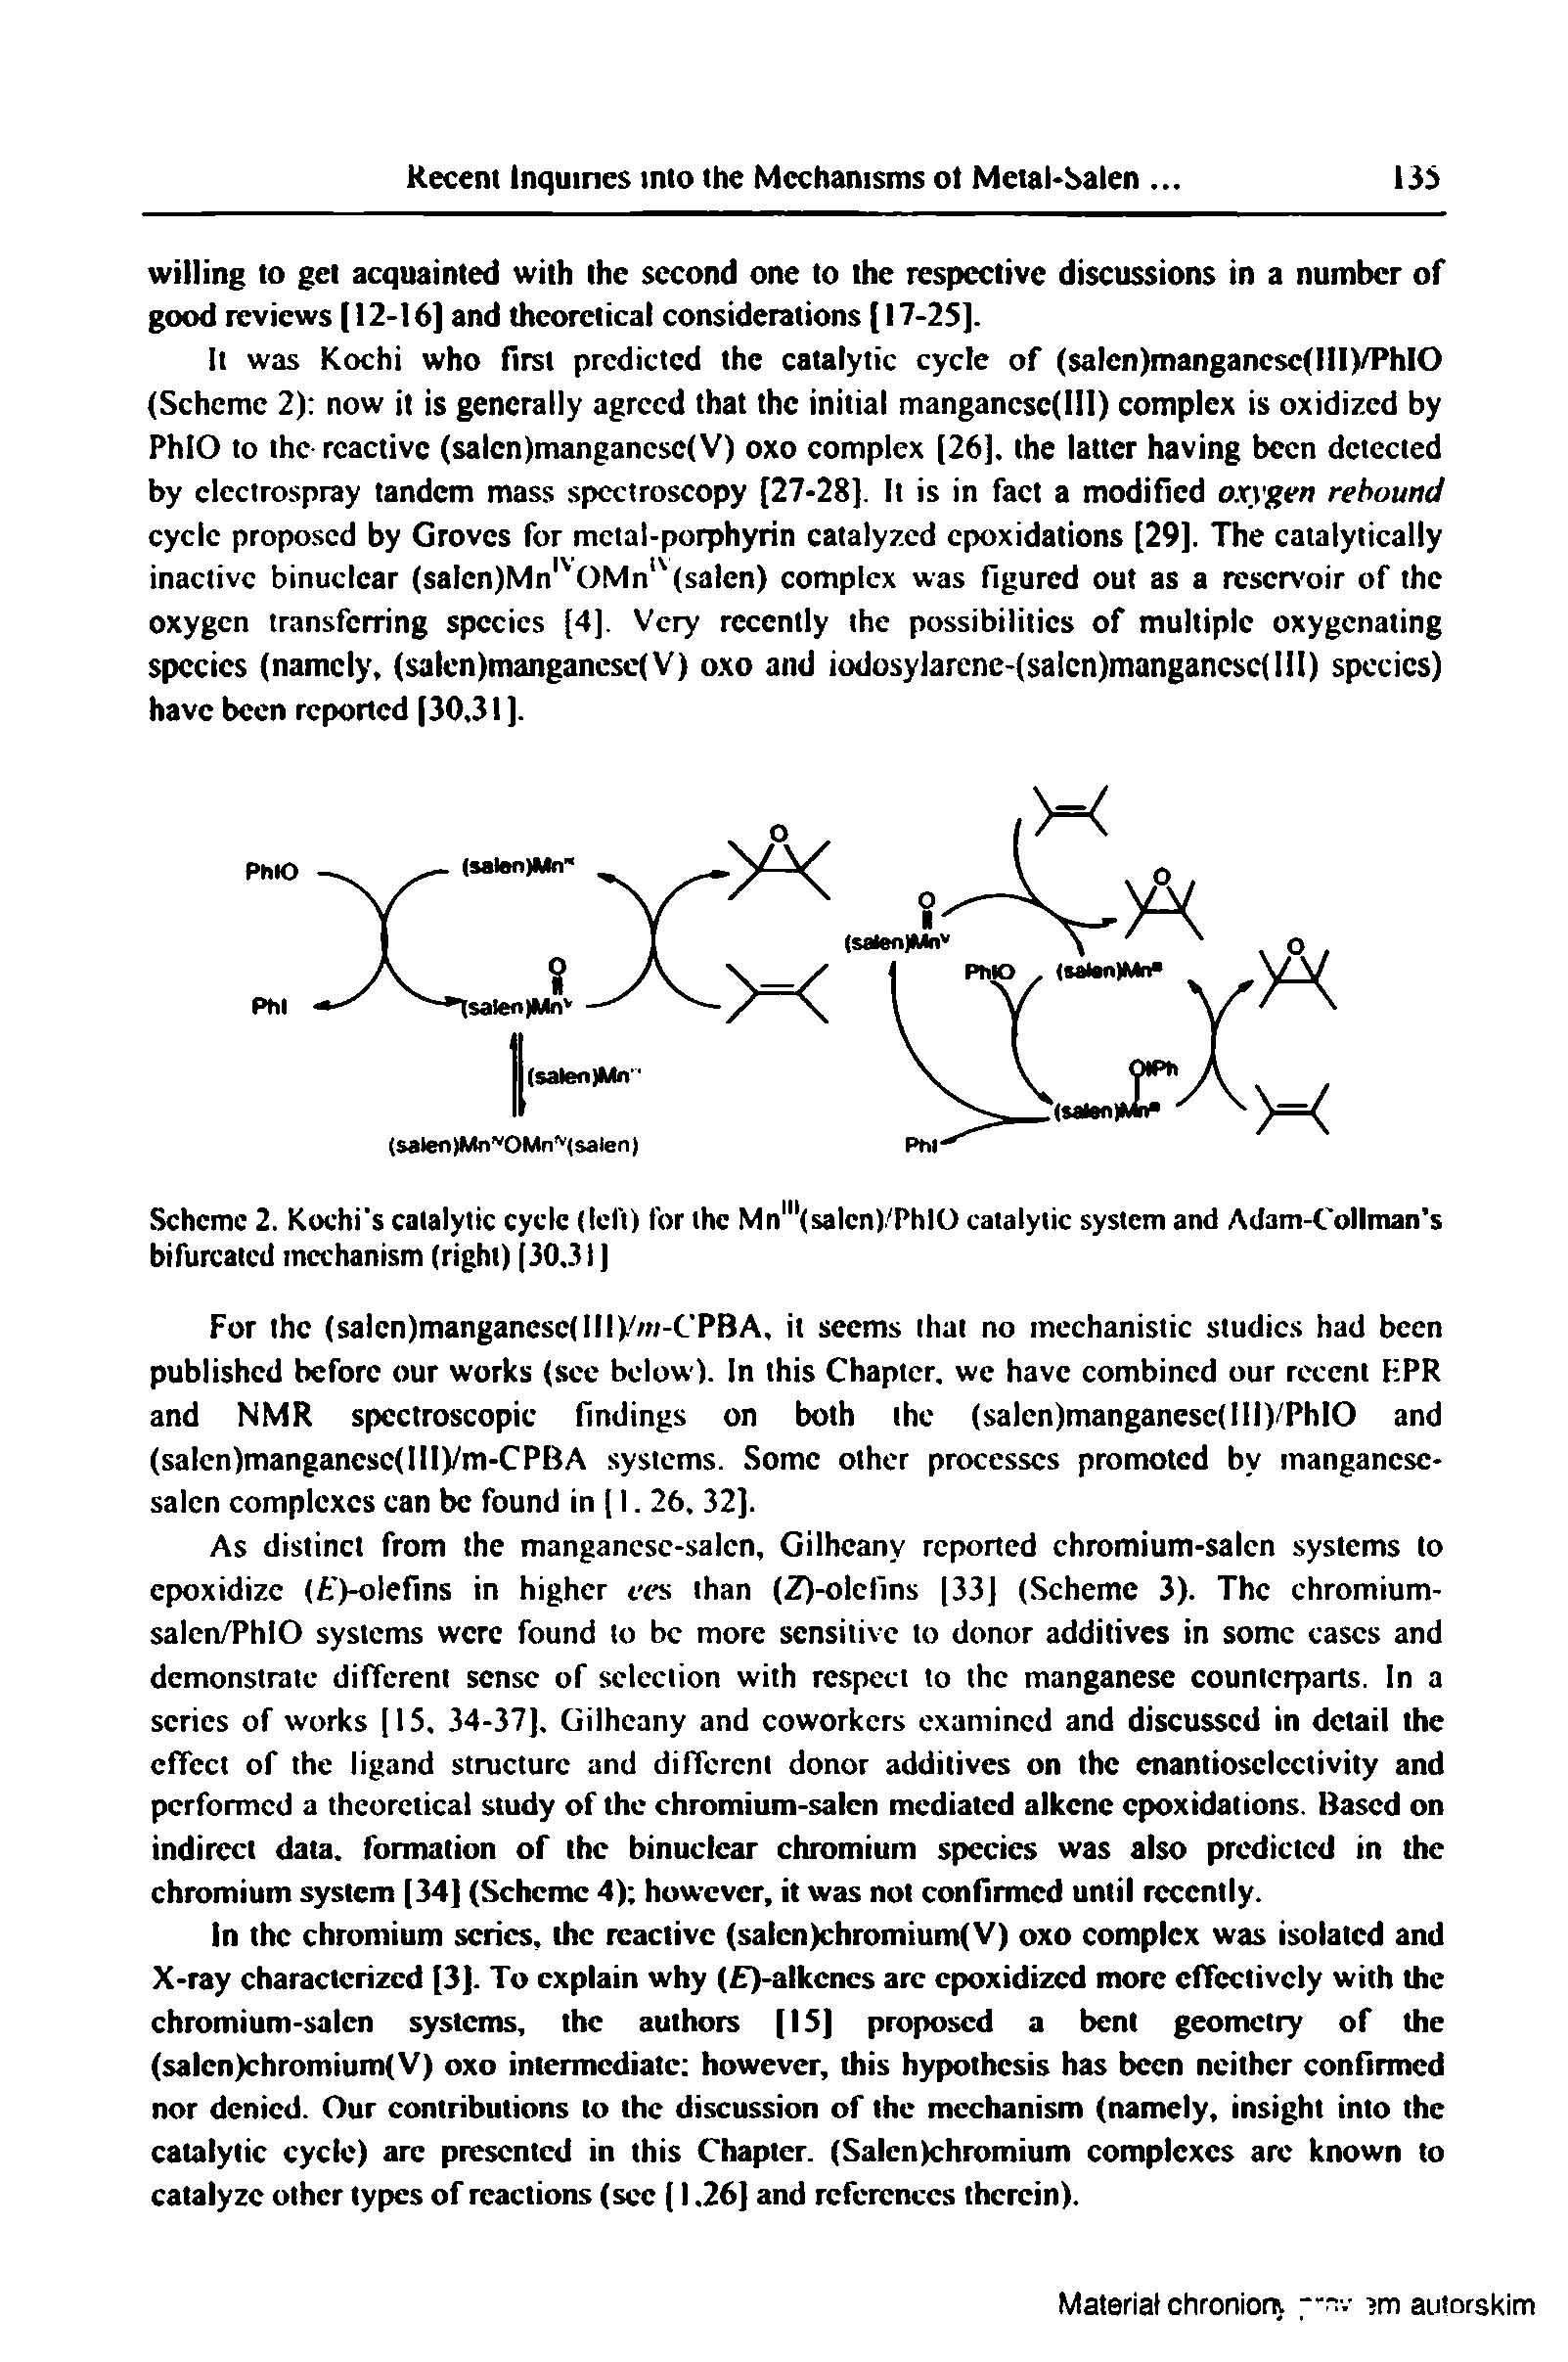 Scheme 2. Kochi s catalytic cycle (lel t) for the Mn "(salcn)/PhlO catalytic system and Adam-Collman s bifurcated mechanism (right) [30,311...